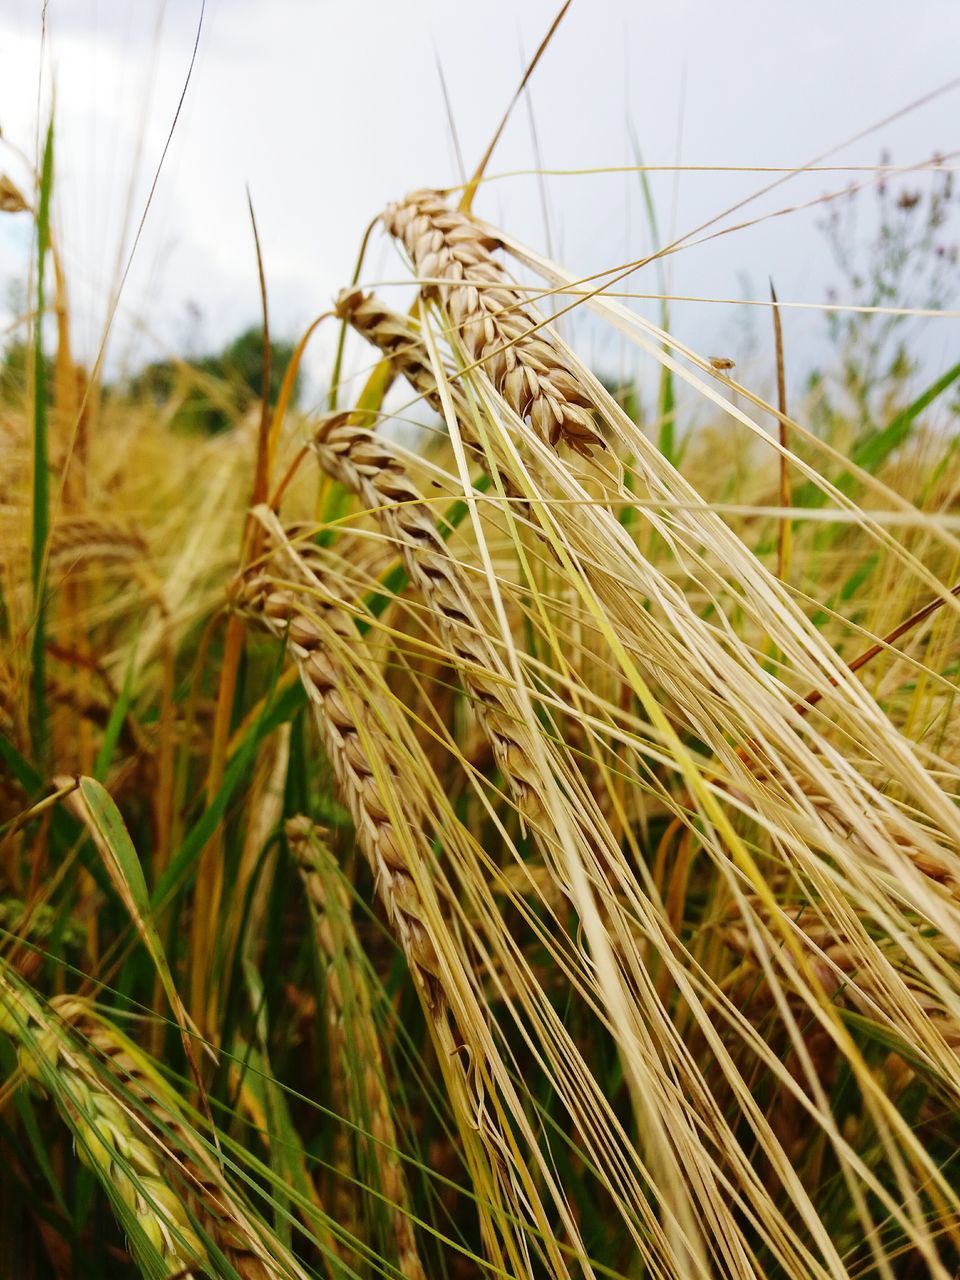 crop, growth, nature, cereal plant, wheat, ear of wheat, plant, close-up, agriculture, field, tranquility, focus on foreground, no people, day, green color, outdoors, beauty in nature, sky